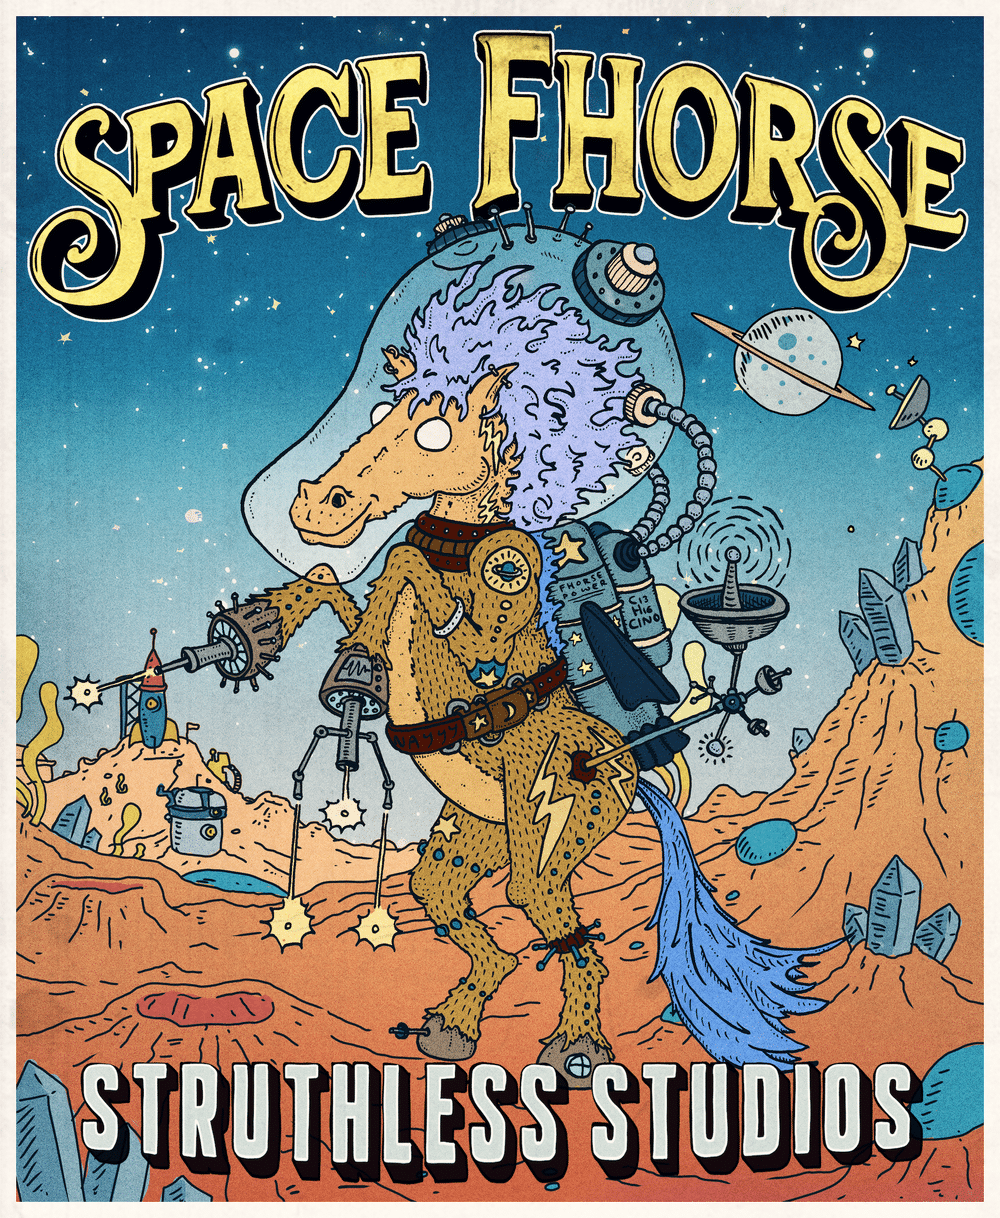 Poster for the Space Horse NFT project